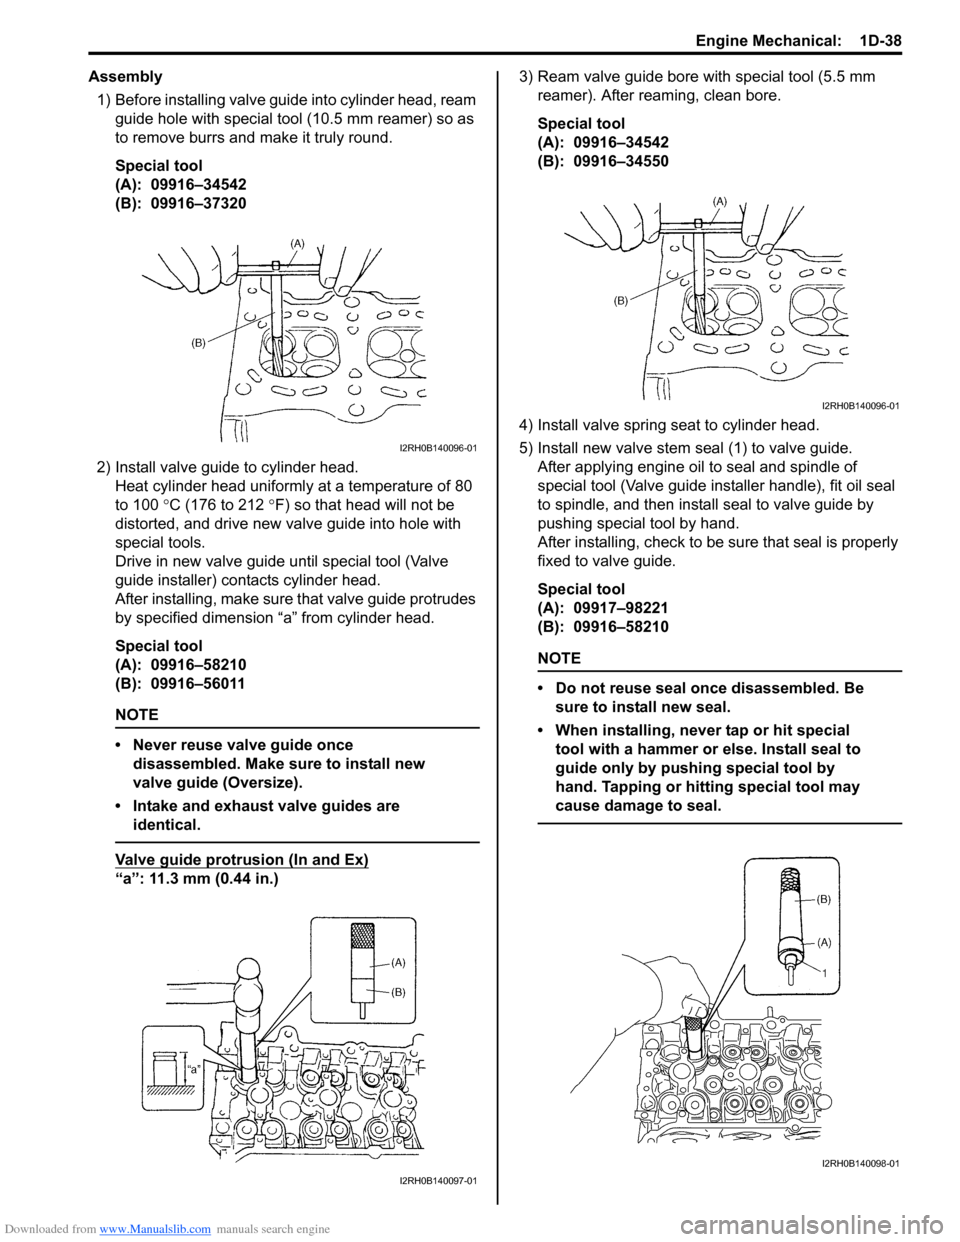 SUZUKI SWIFT 2006 2.G Service Workshop Manual Downloaded from www.Manualslib.com manuals search engine Engine Mechanical:  1D-38
Assembly1) Before installing  valve guide into cylinder head, ream 
guide hole with special tool (10.5 mm reamer) so 